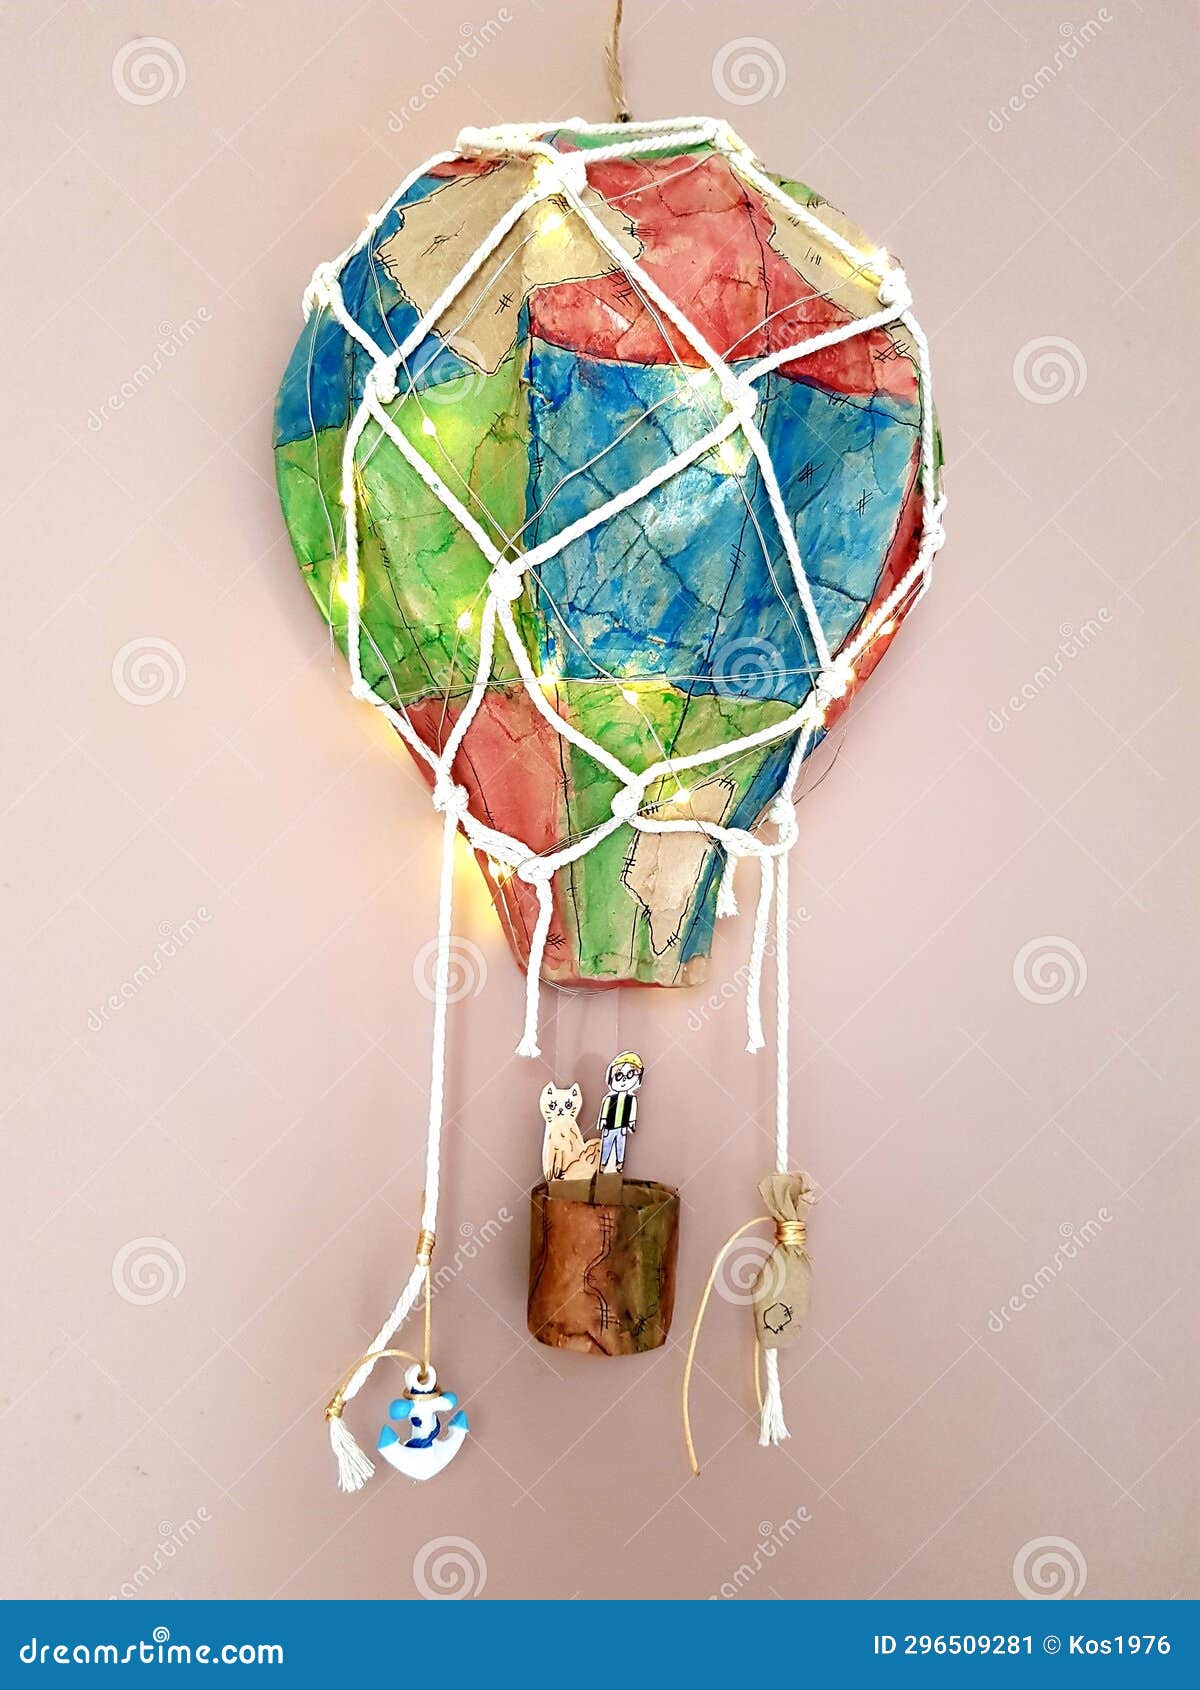 Colorful Balloon Hanging on a String. Colorful Handmade. Stock